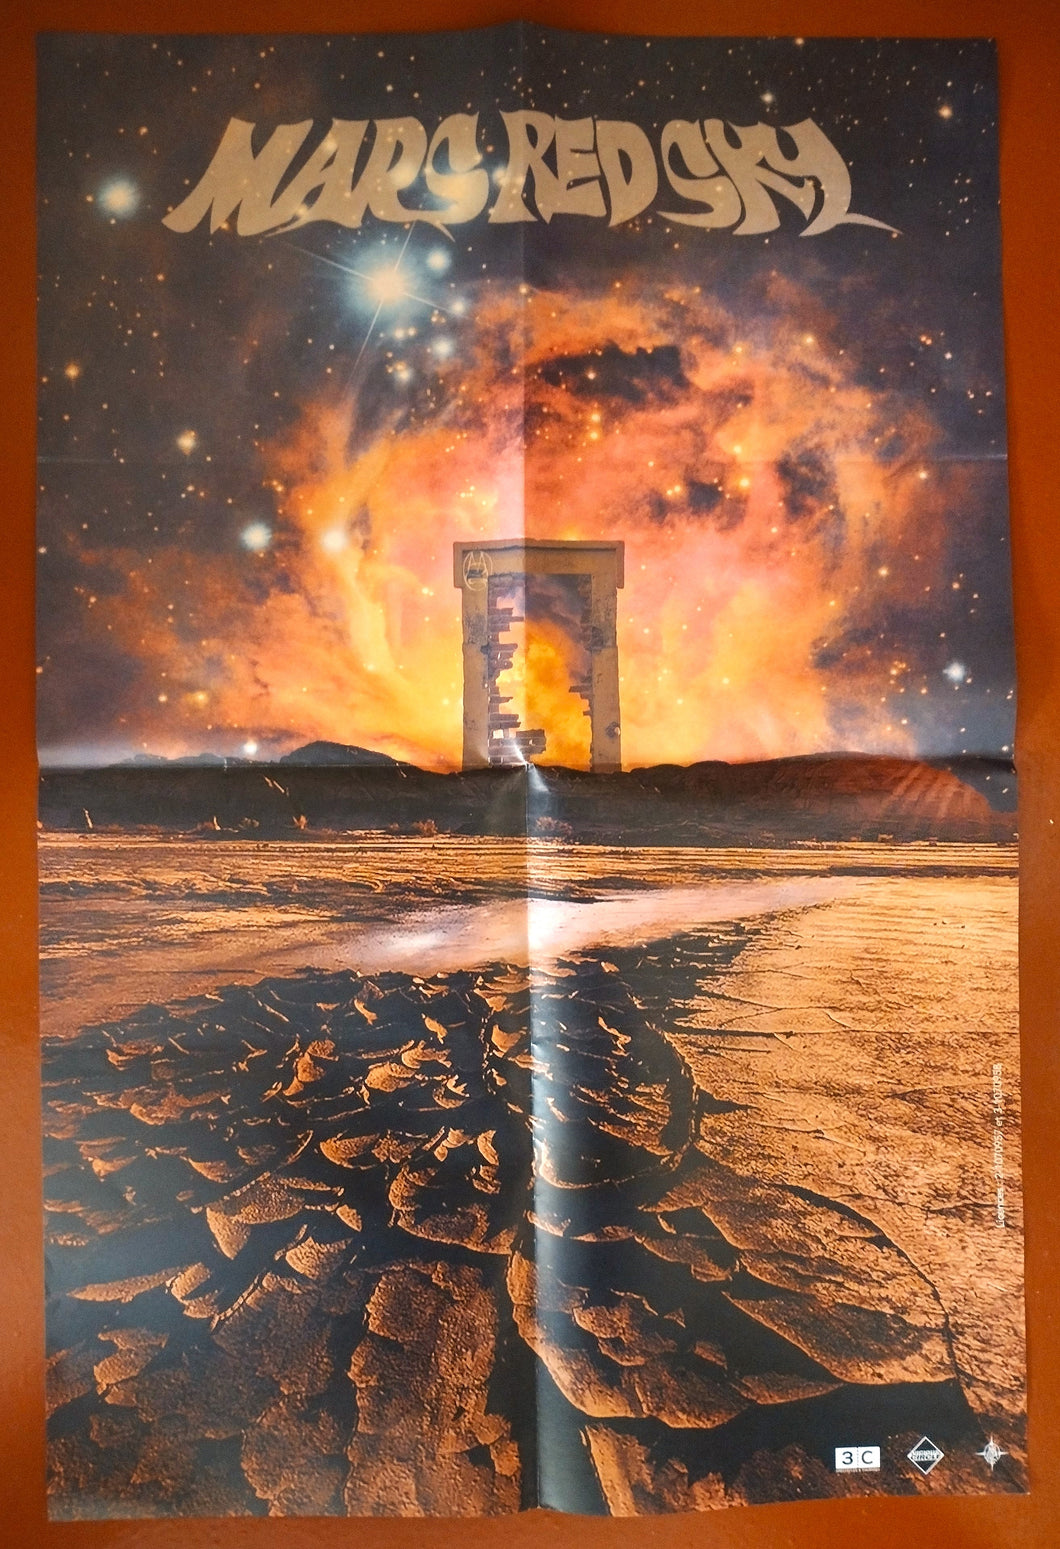 Mars Red Sky (Poster)